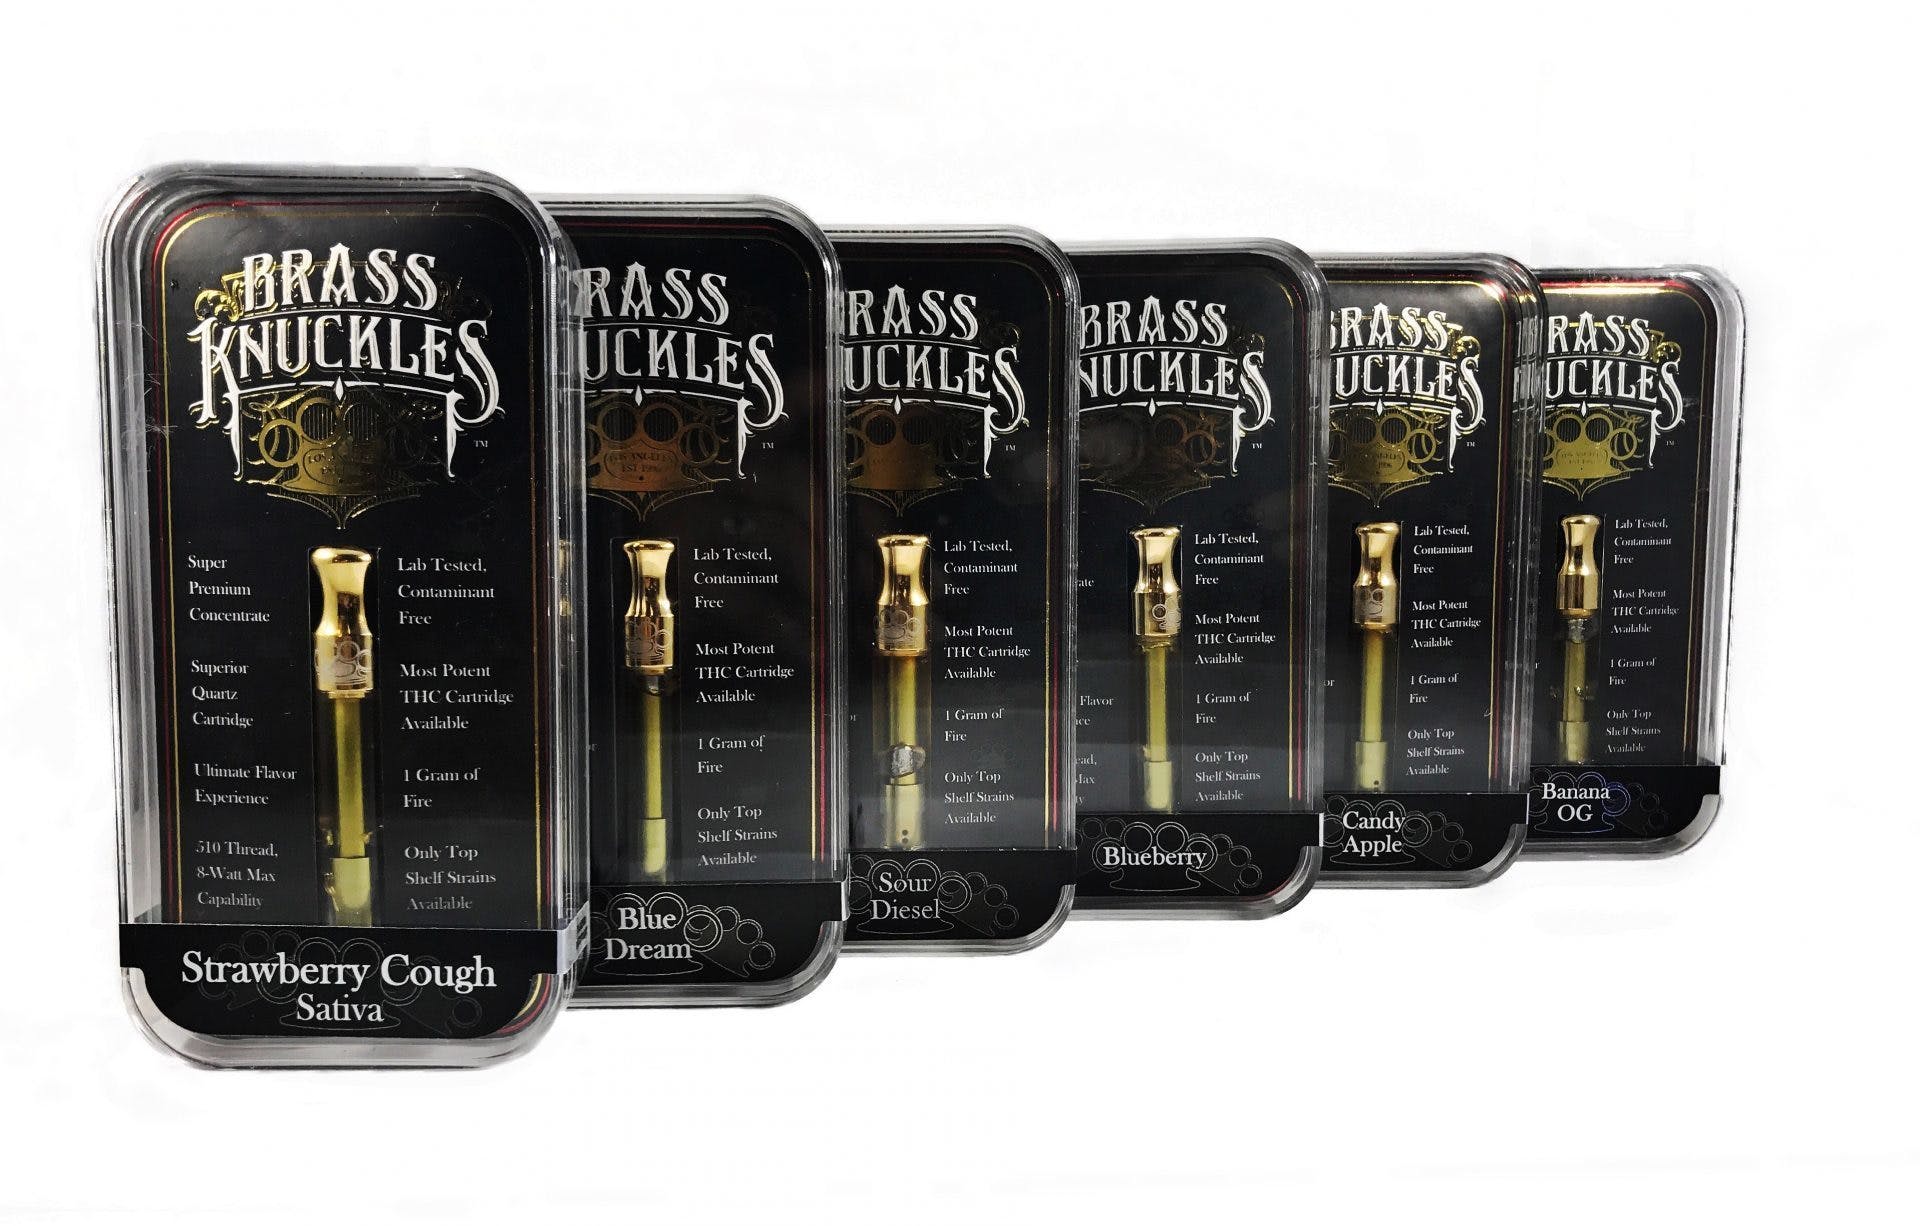 concentrate-brass-knuckles-tangie-3-for-90-21-mix-and-match